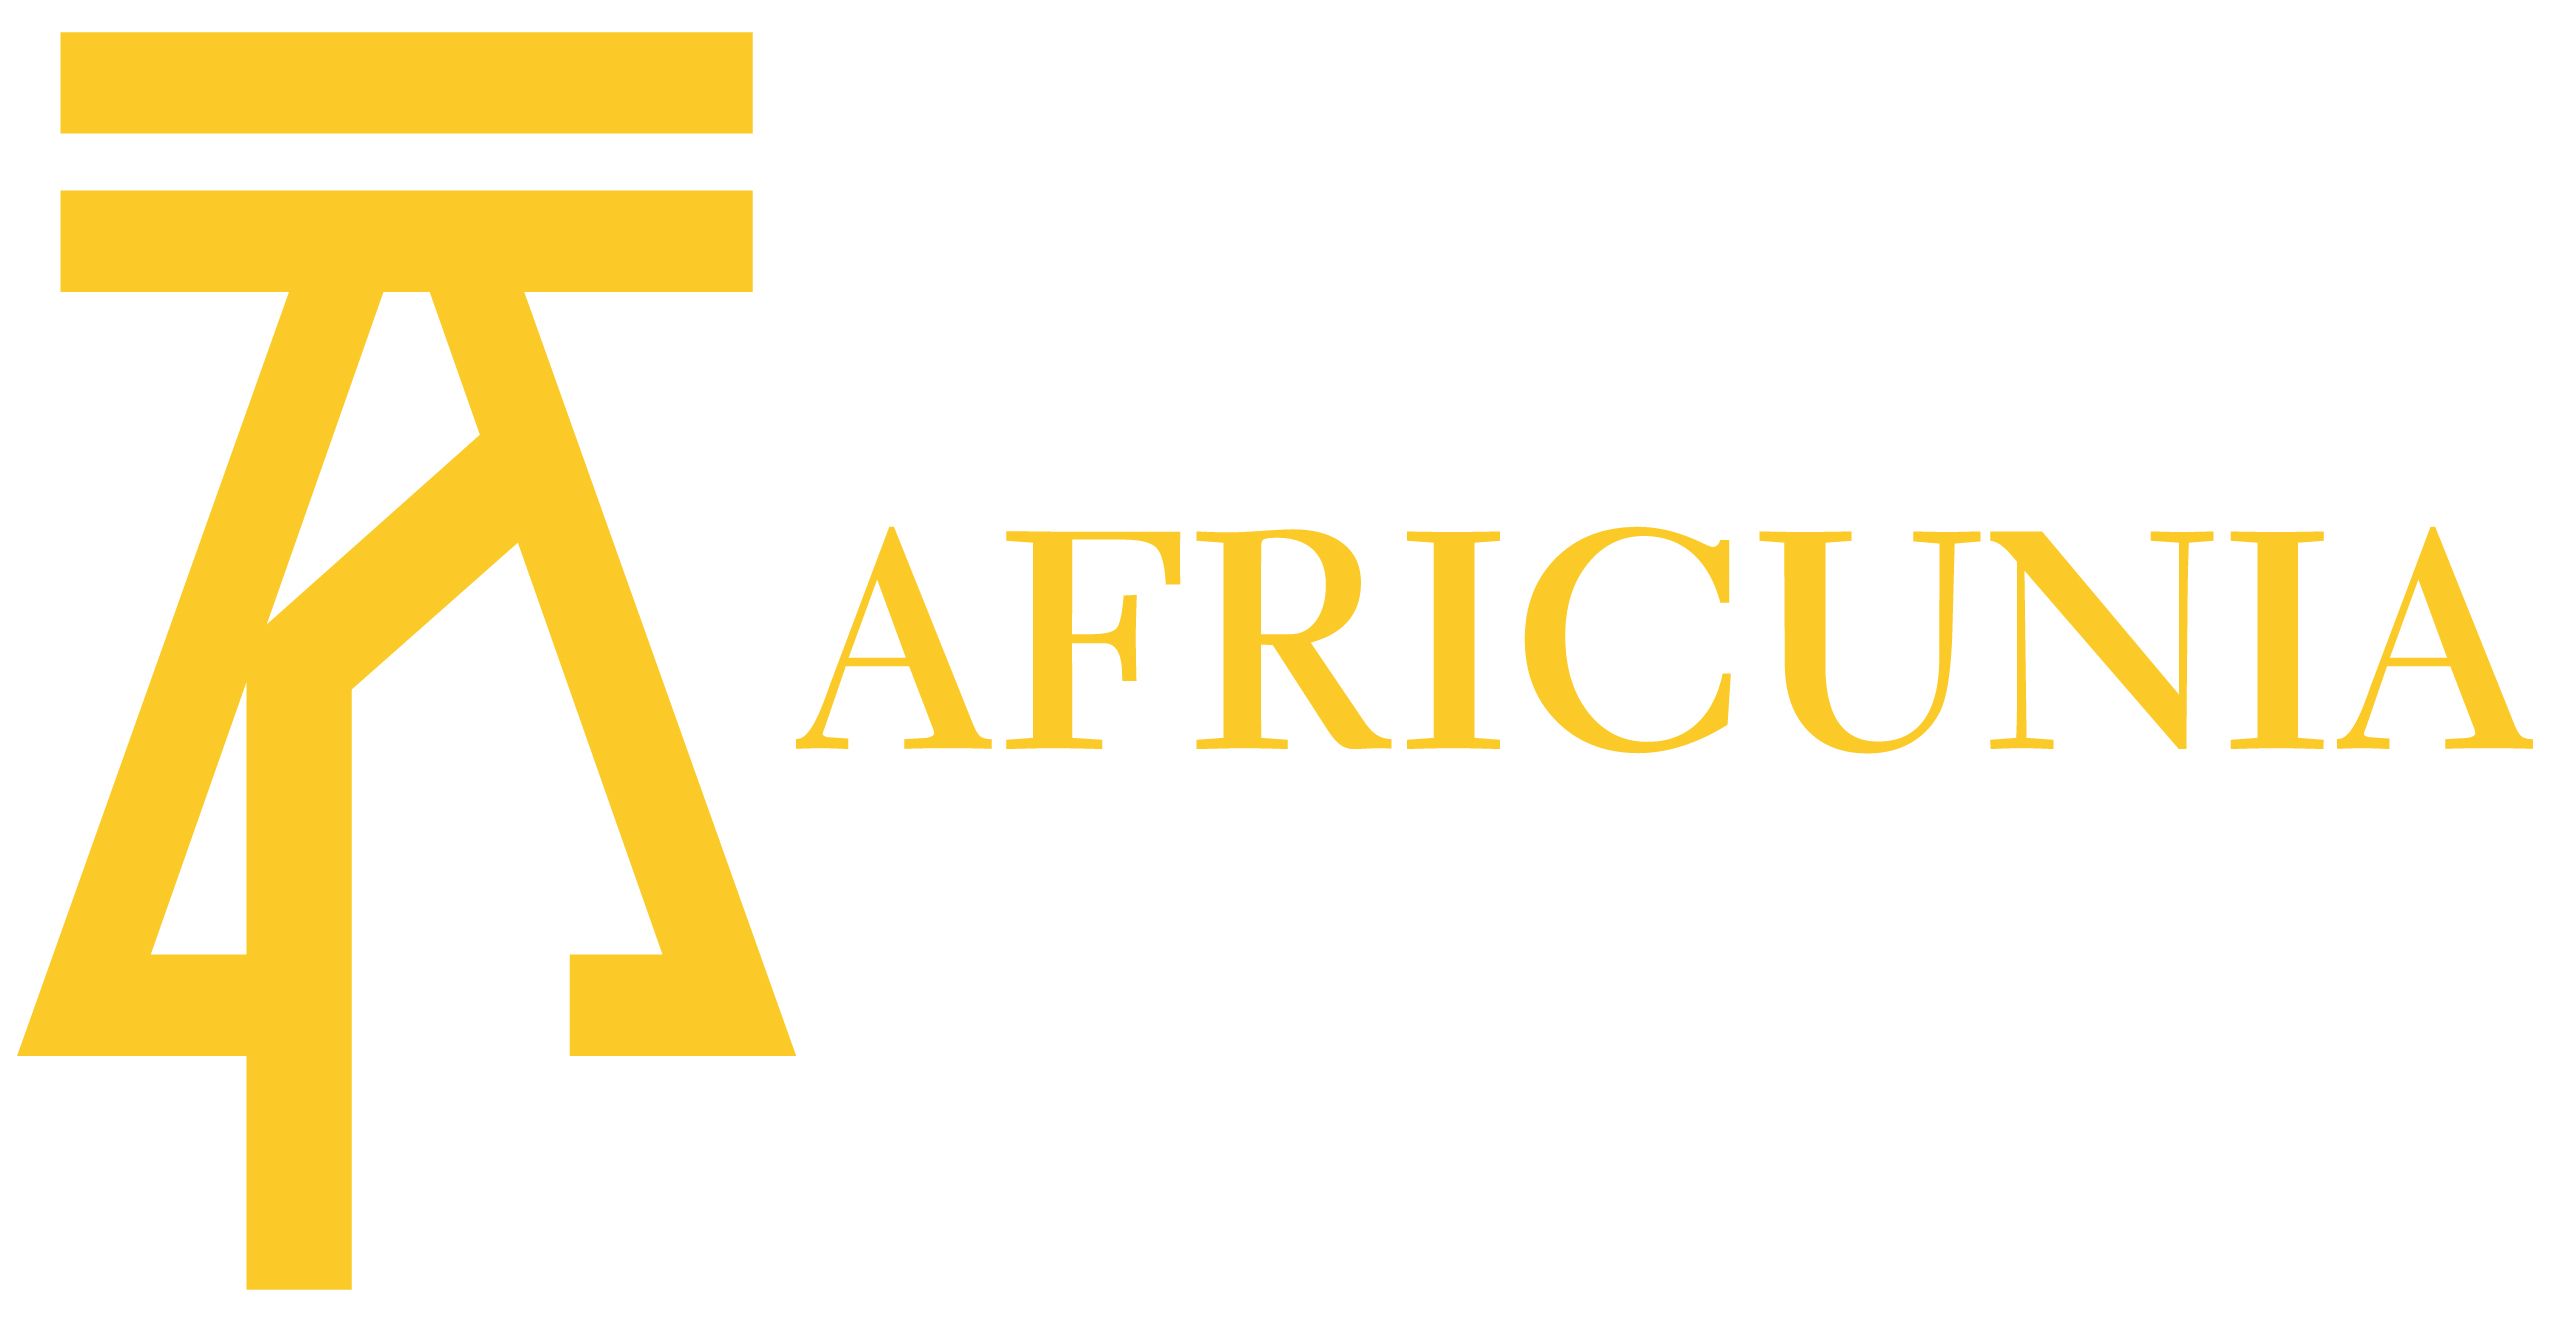 AFRICUNIA sign with name.jpg